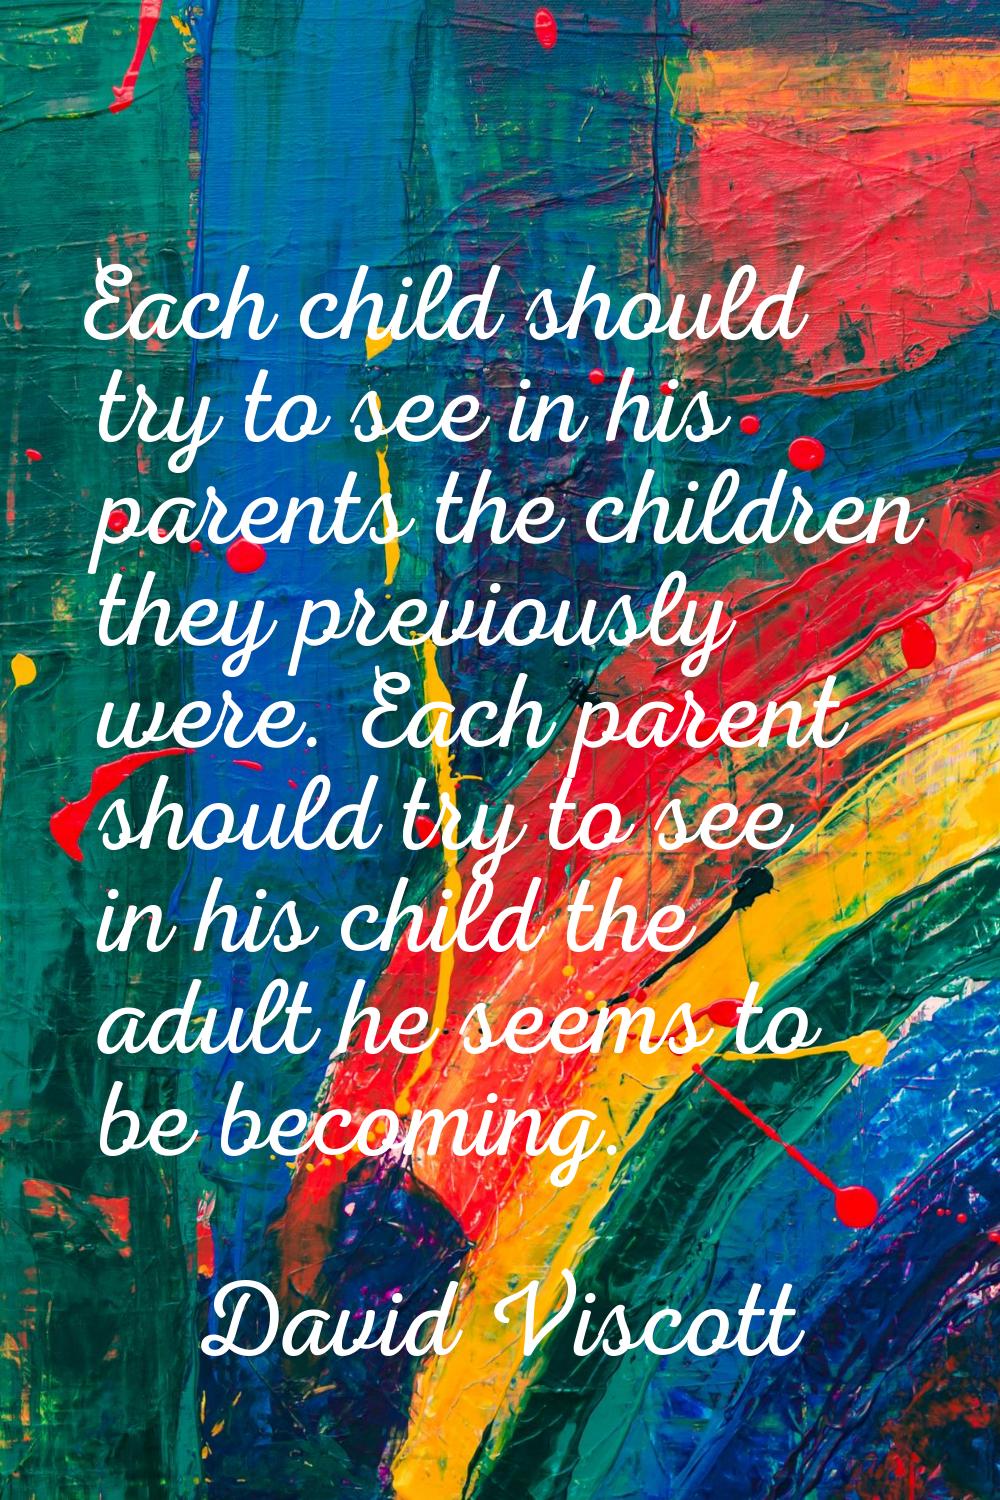 Each child should try to see in his parents the children they previously were. Each parent should t